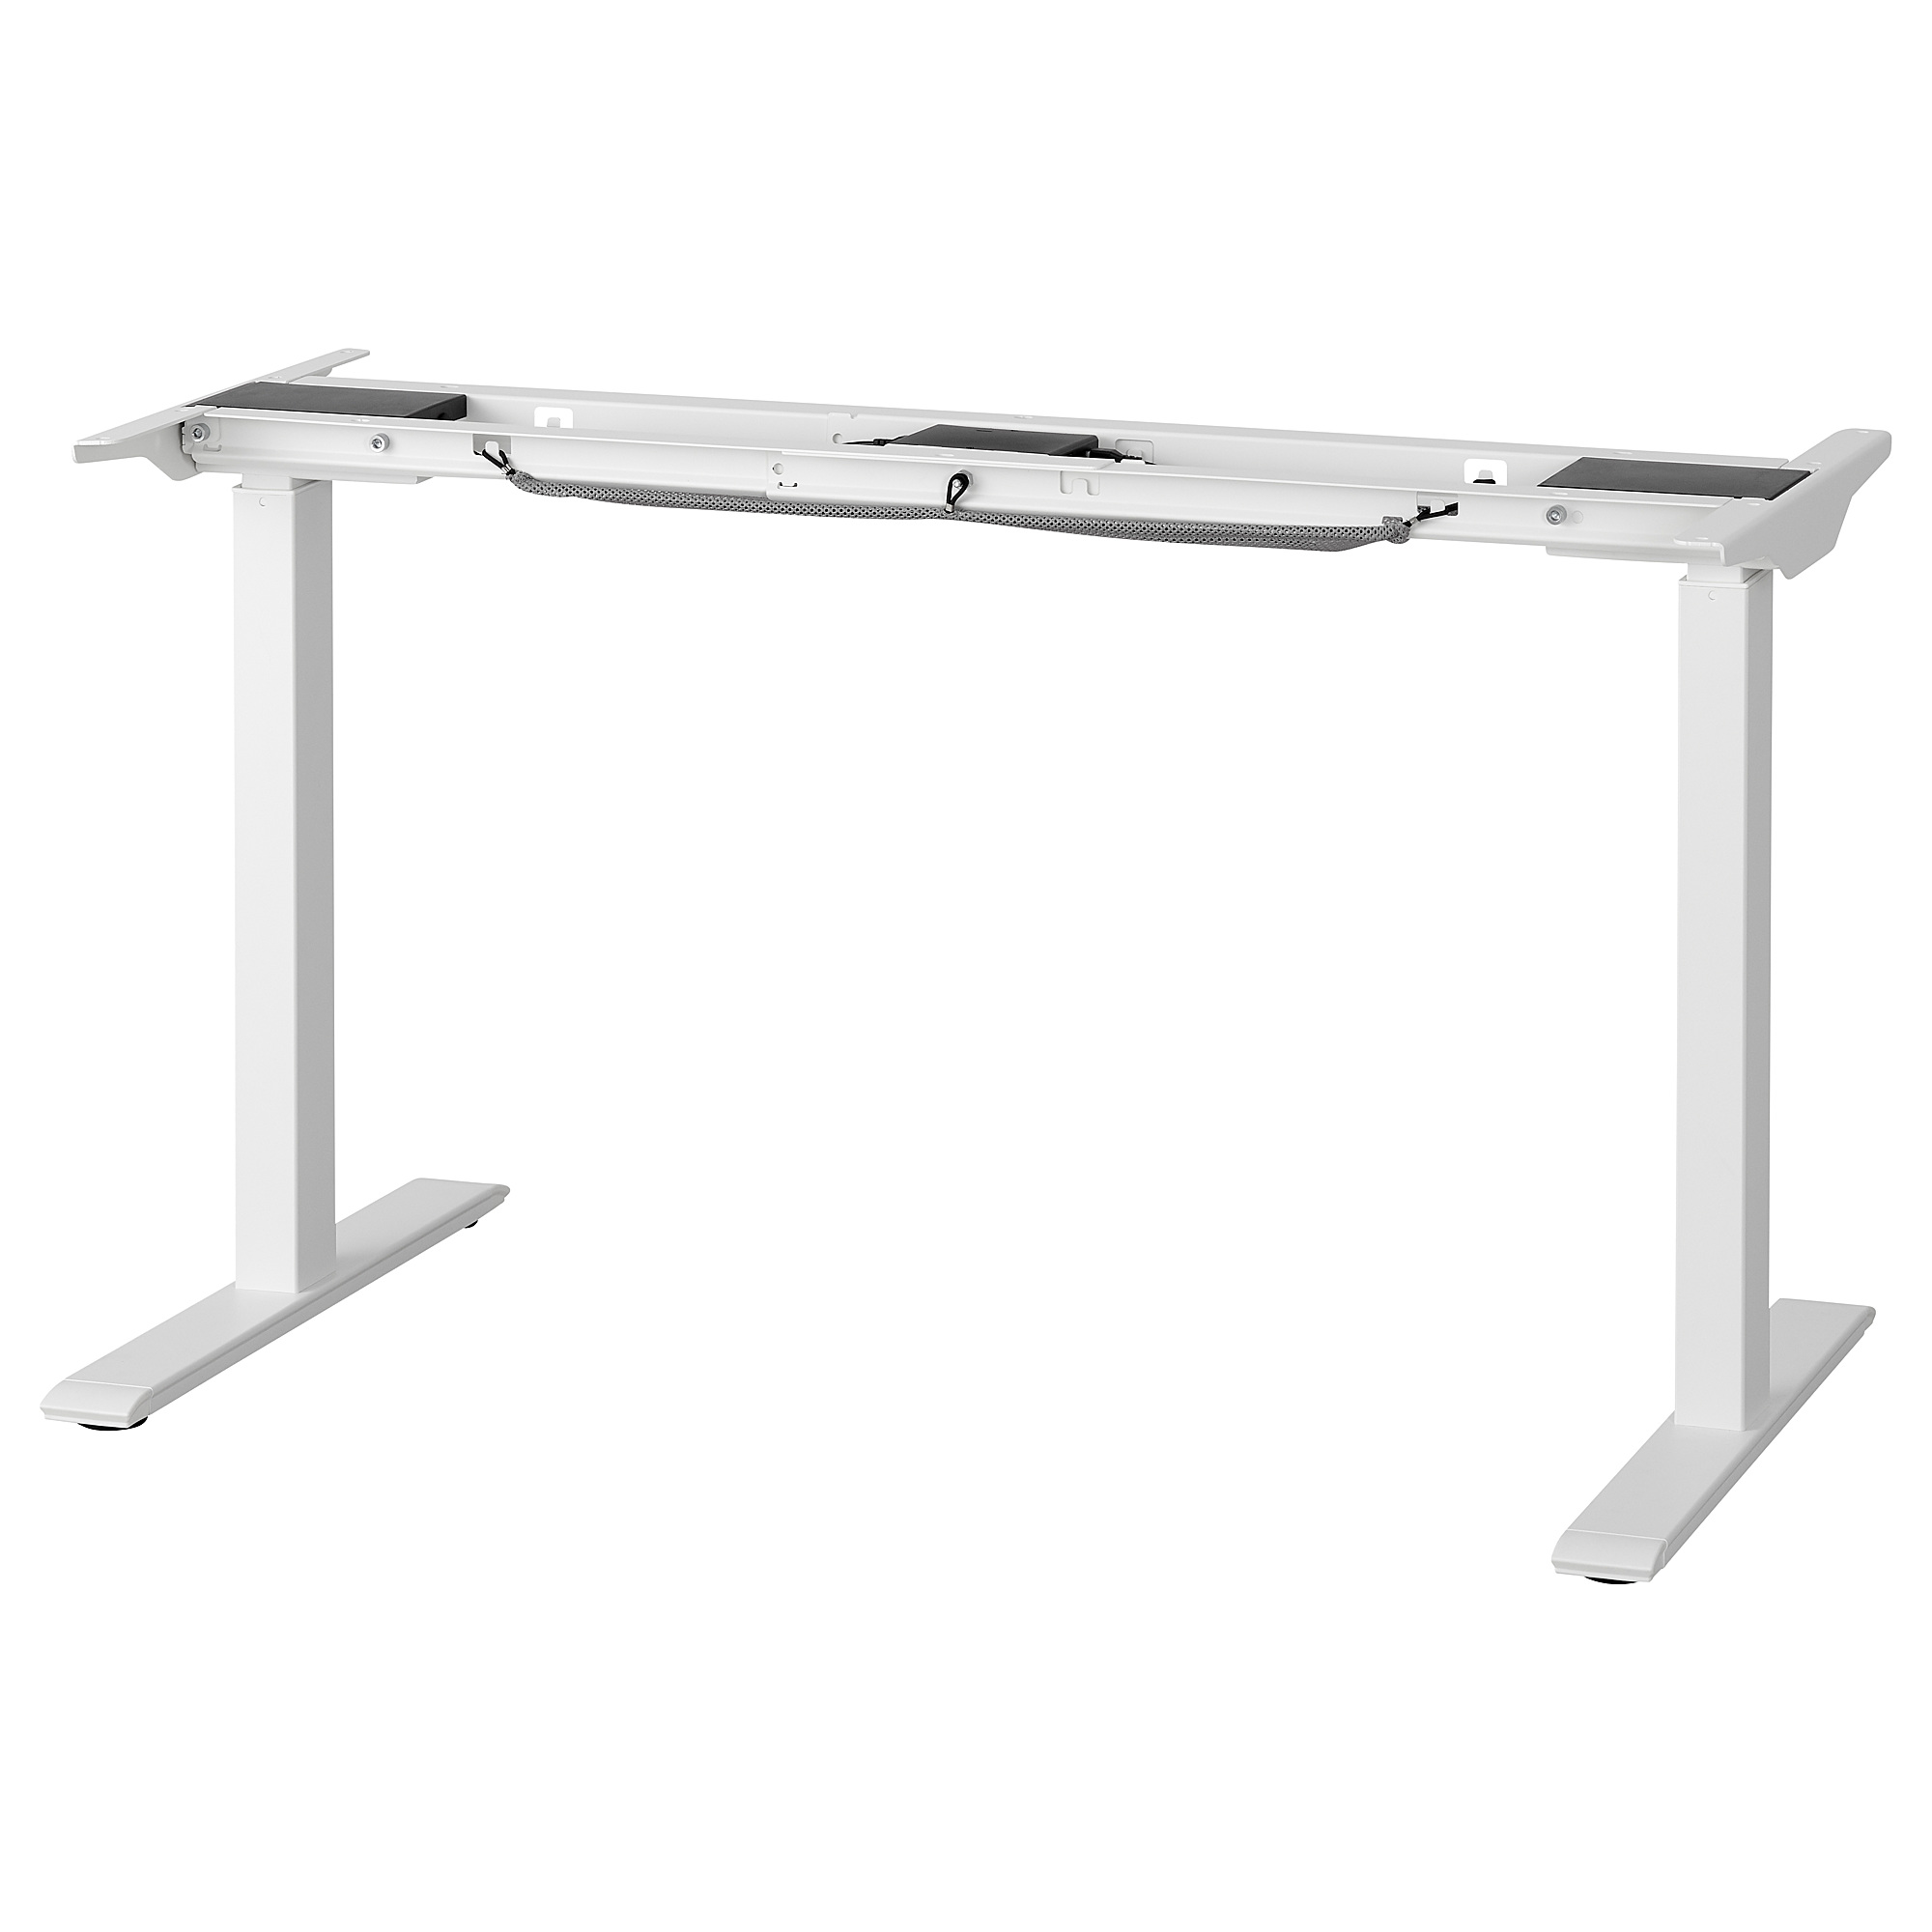 RODULF underframe sit/stand f table top